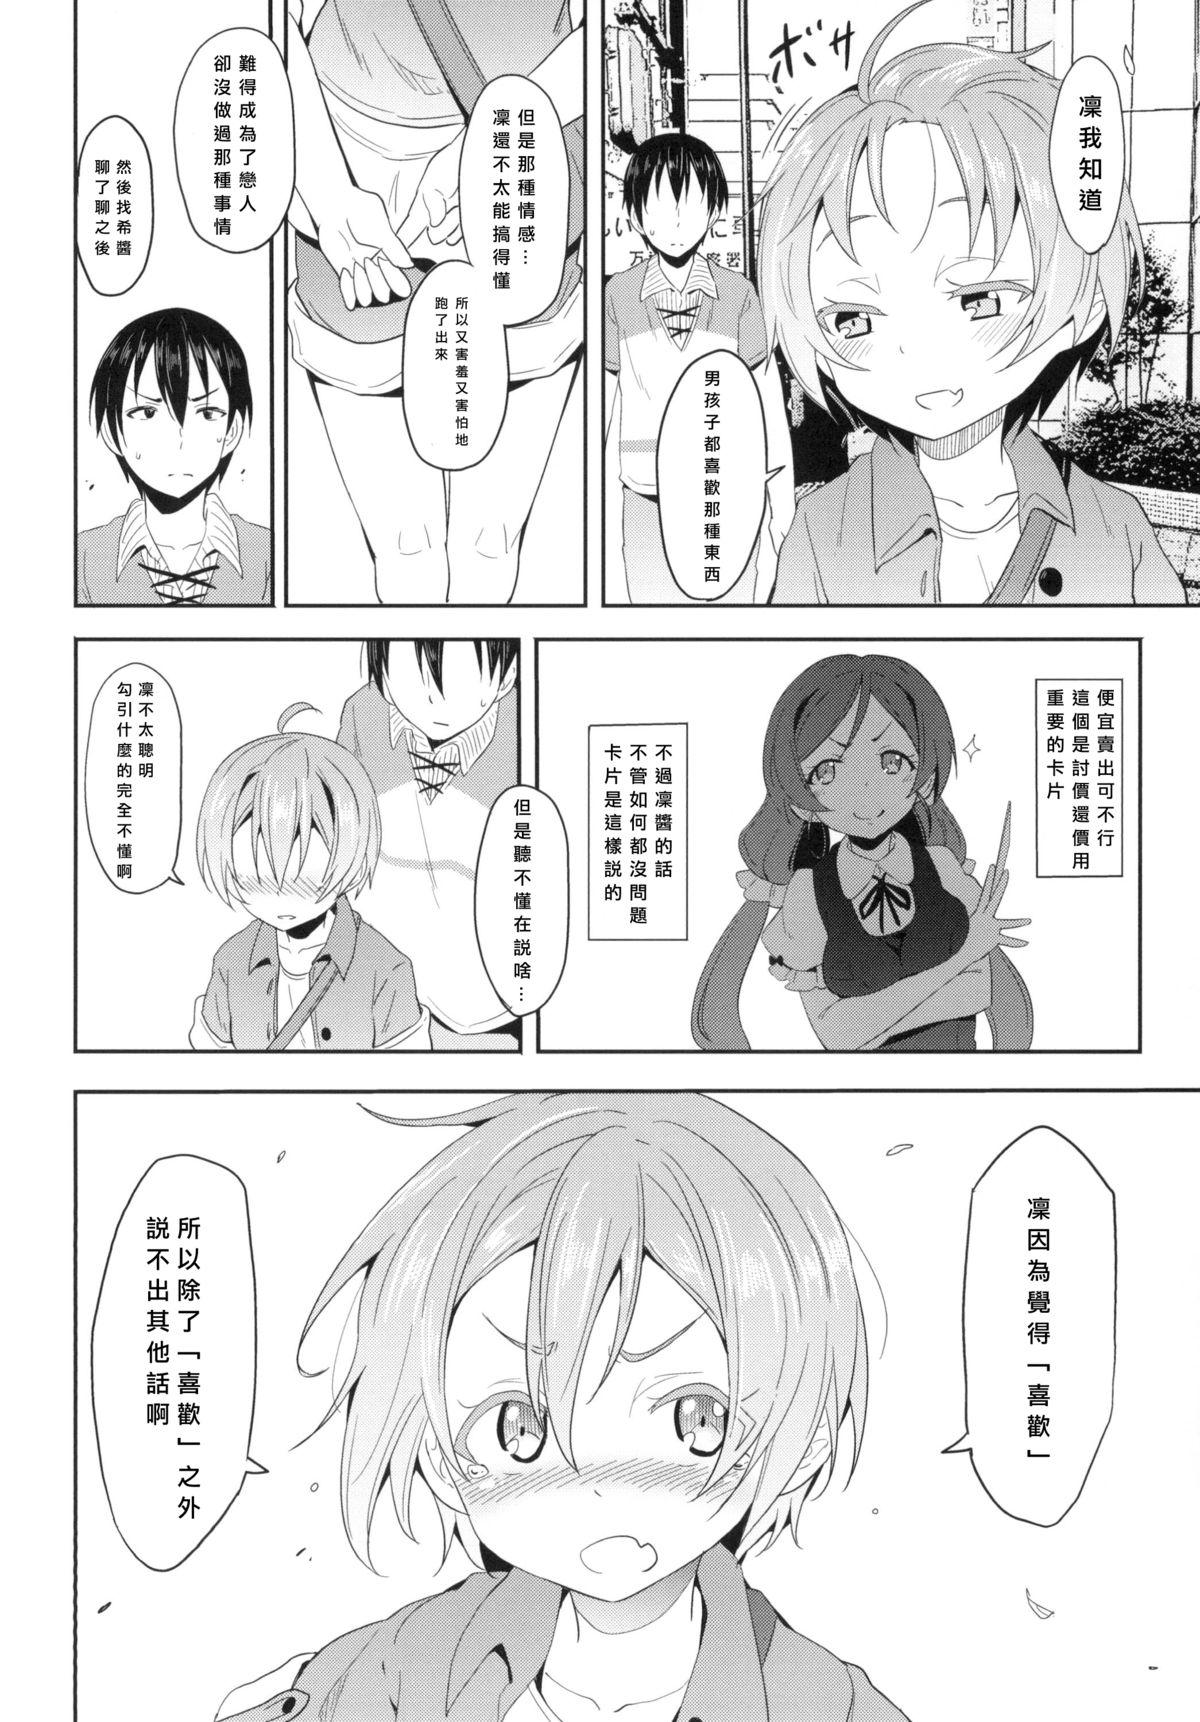 Glamour Porn Rin-chan to Issho. - Love live Deutsche - Page 6